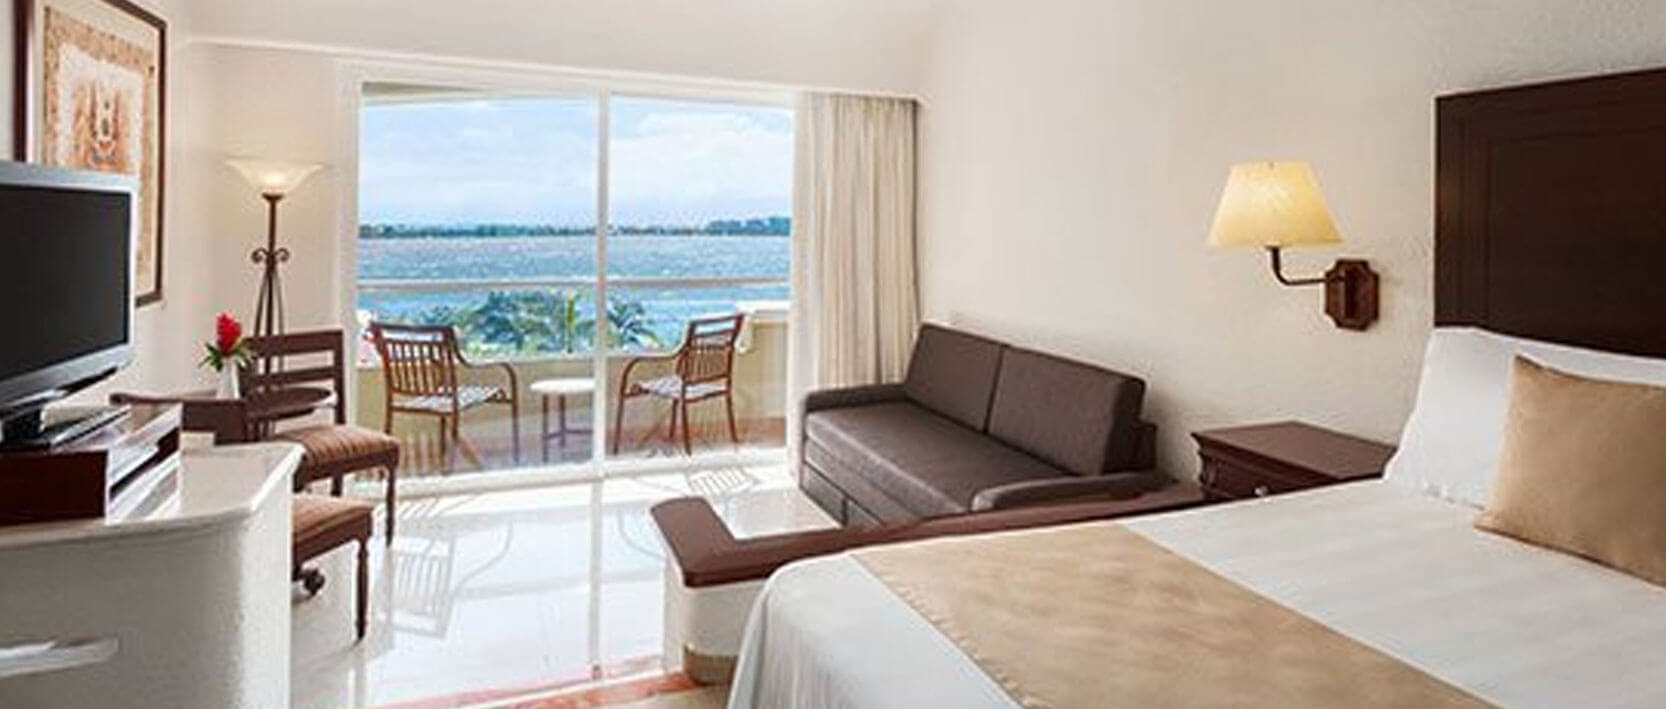 Gran Caribe Cancun Accommodations - Junior Suite